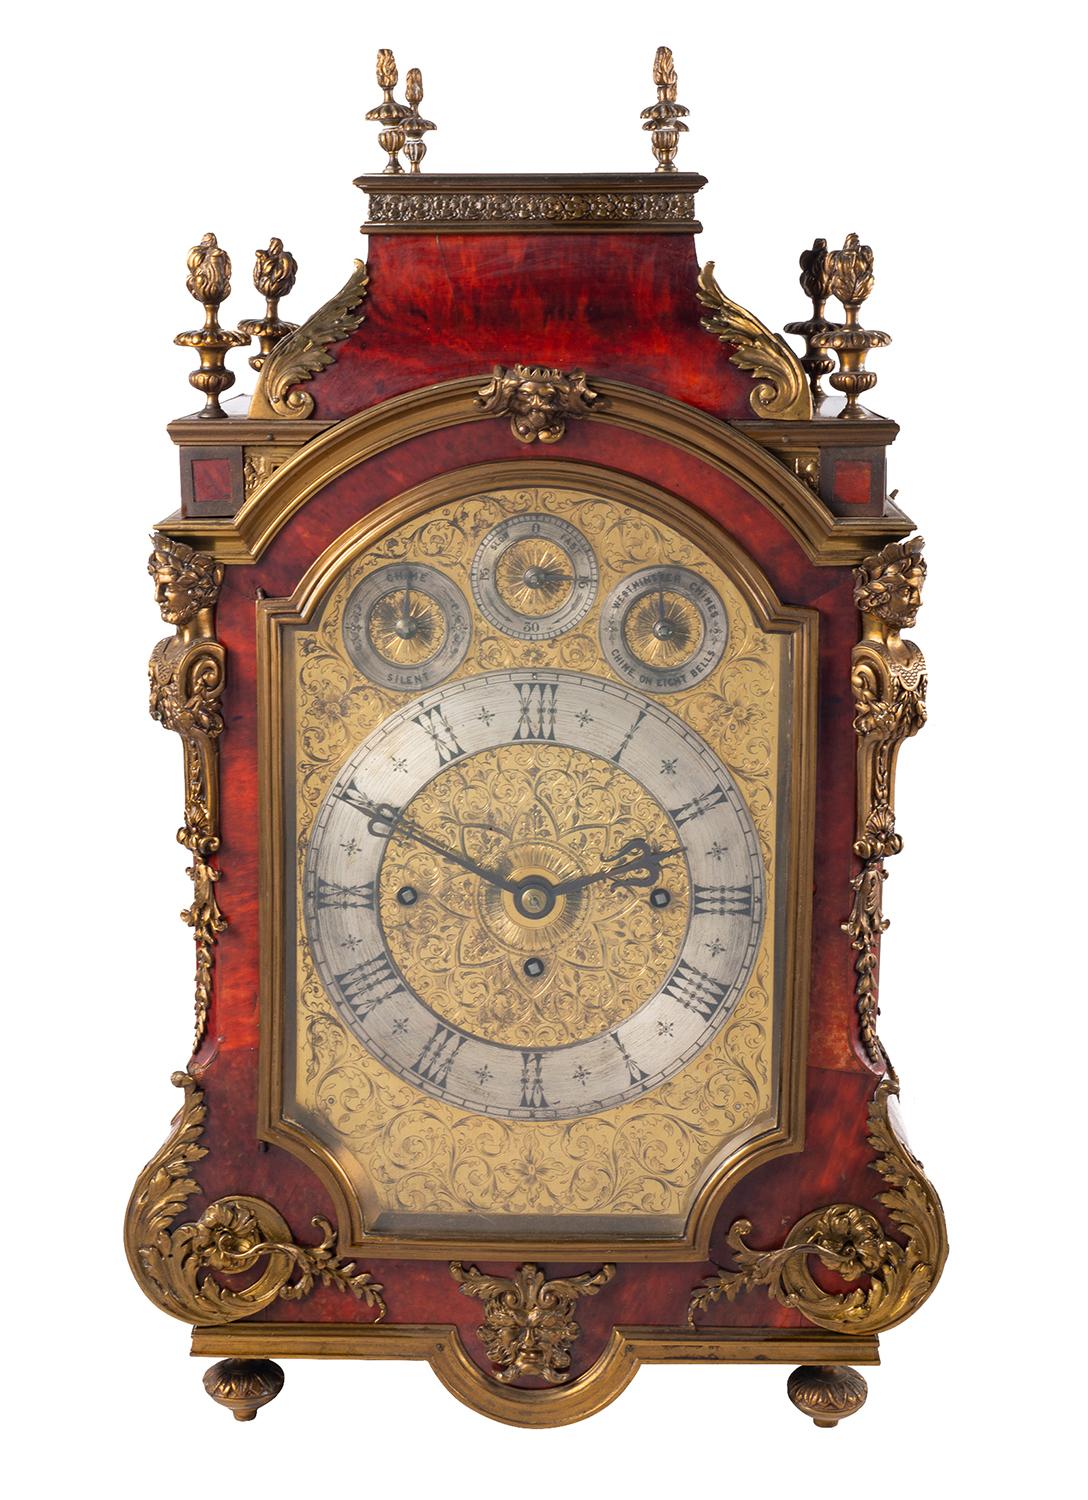 A very impressive and fine quality late 19th Century English bracket / mantel clock. Veneered in red Tortoiseshell and having wonderful gilded ormolu mounts and mouldings. Having flamed finials, pierced, fretted mouldings and panels, scrolling